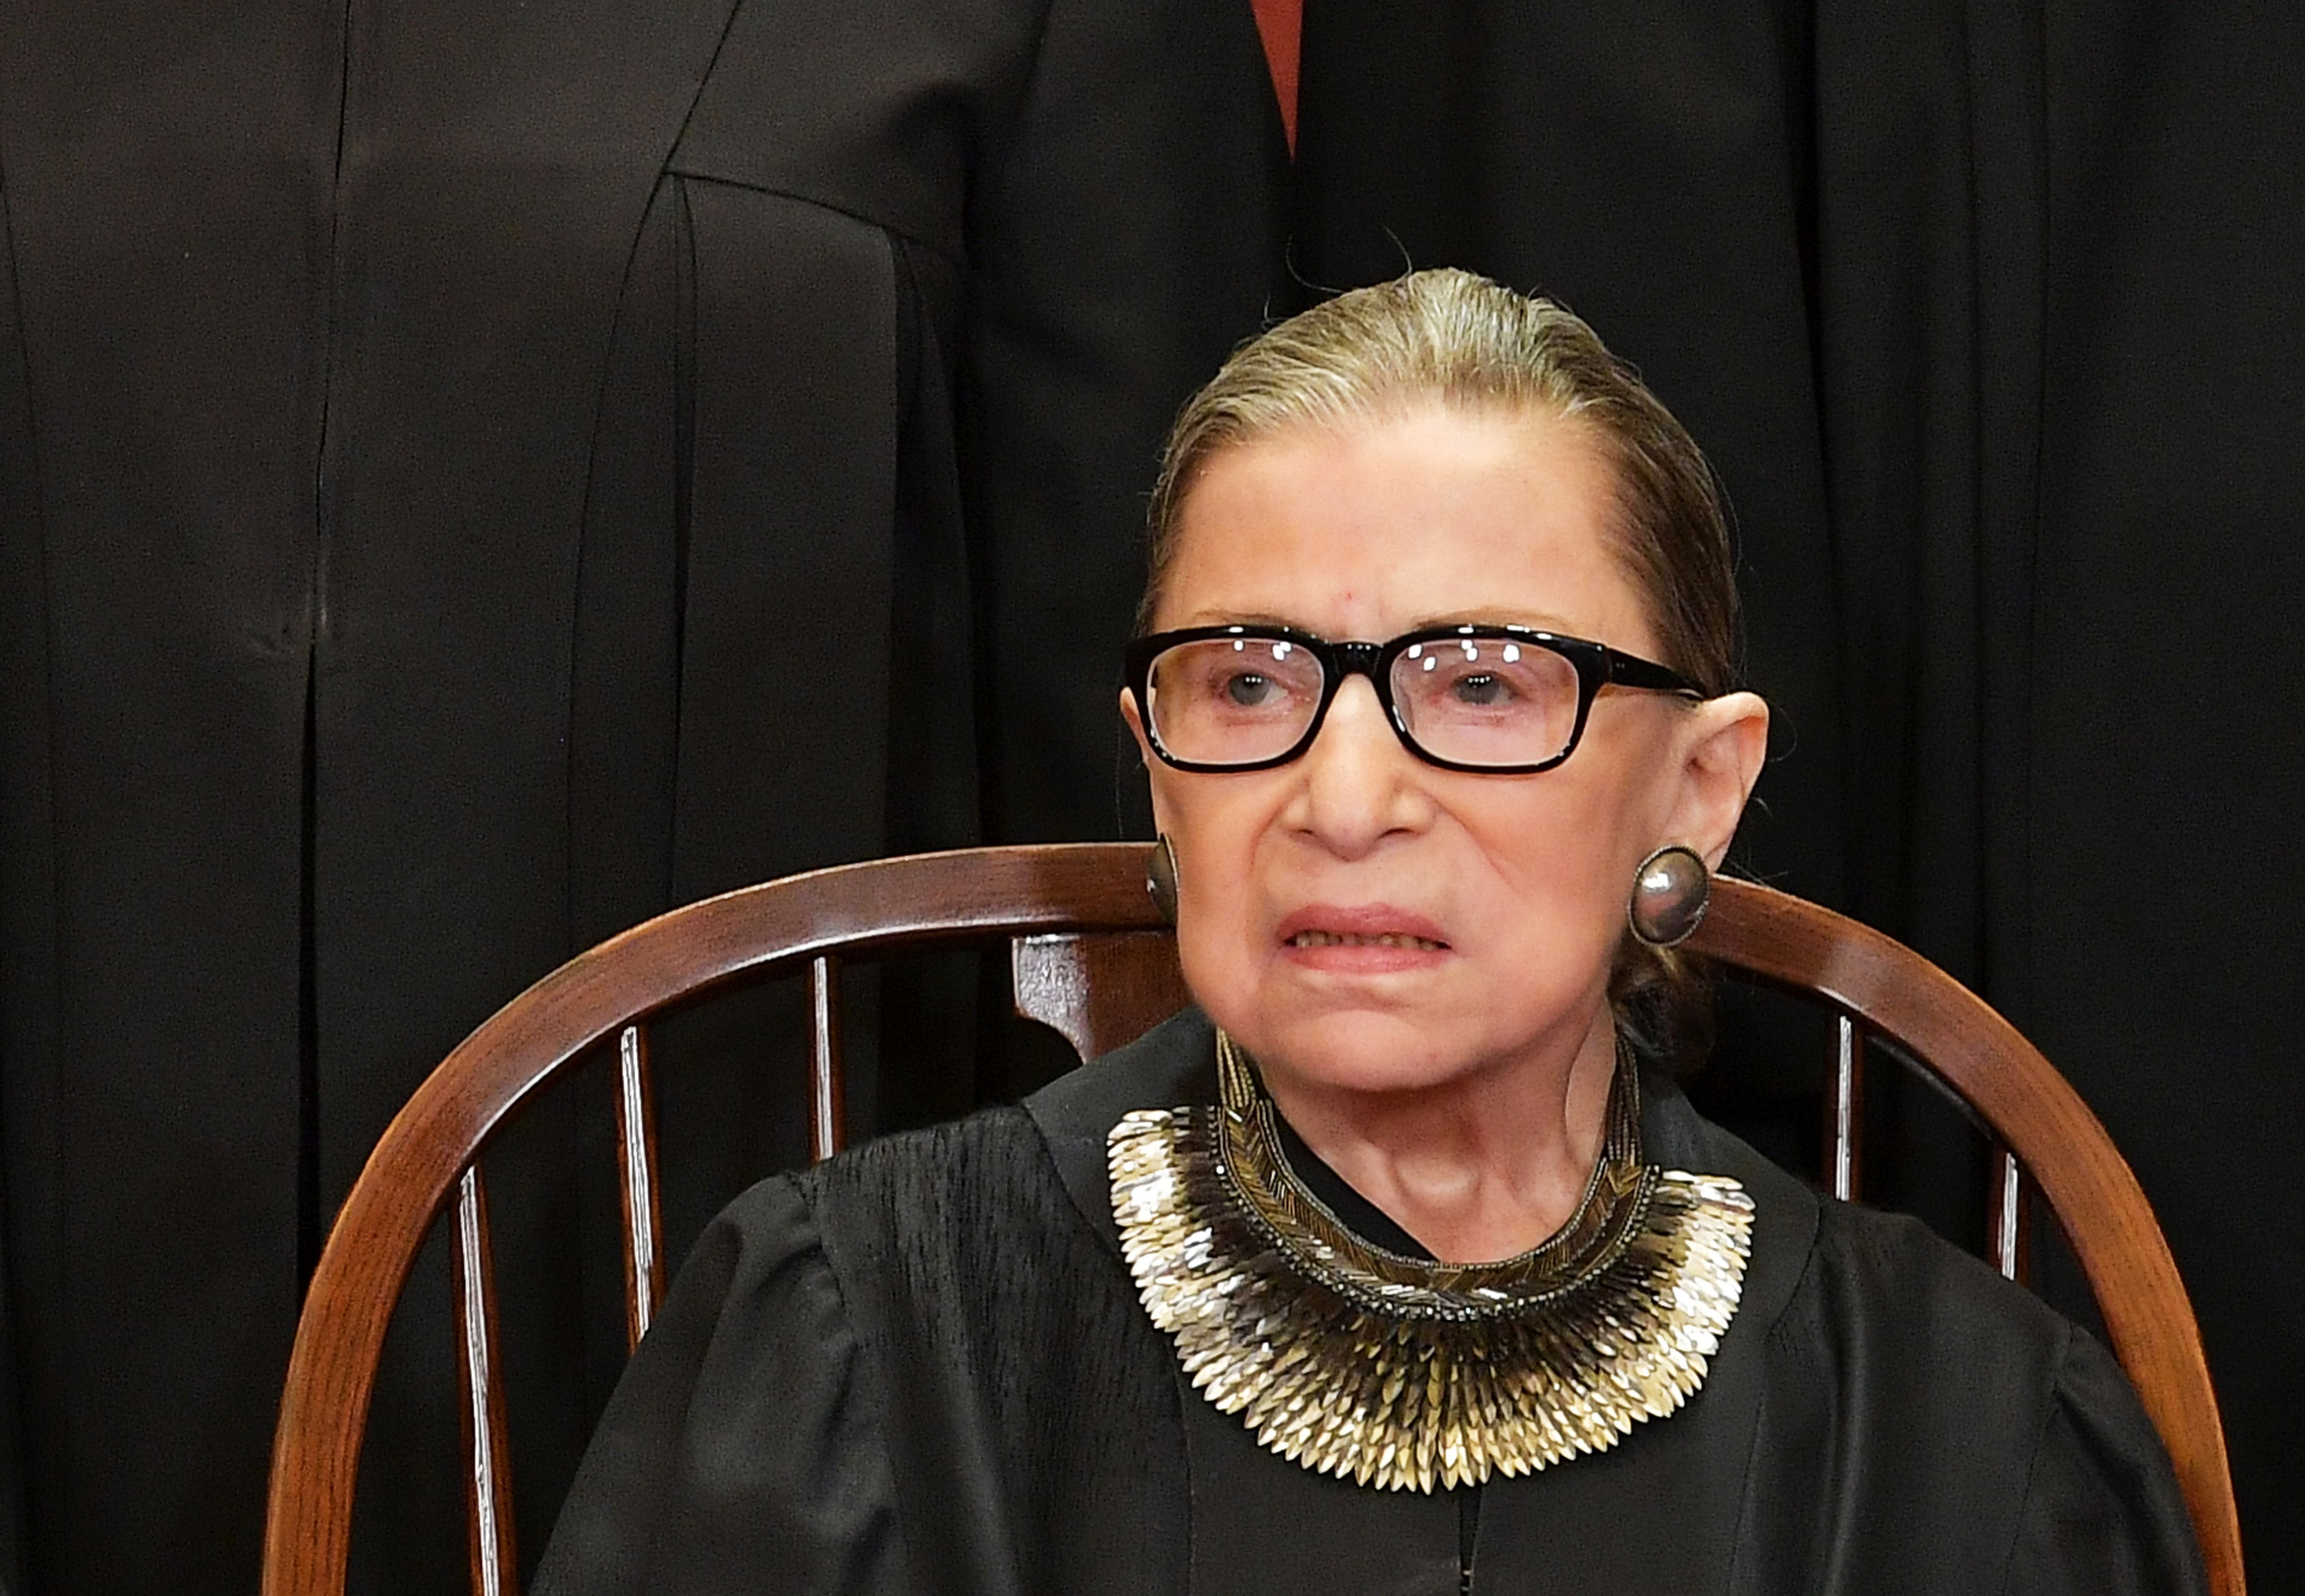 Justice Ruth Bader Ginsburg poses for the official photo at the Supreme Court in Washington, DC on November 30, 2018. (Mandel Ngan/AFP/Getty Images)